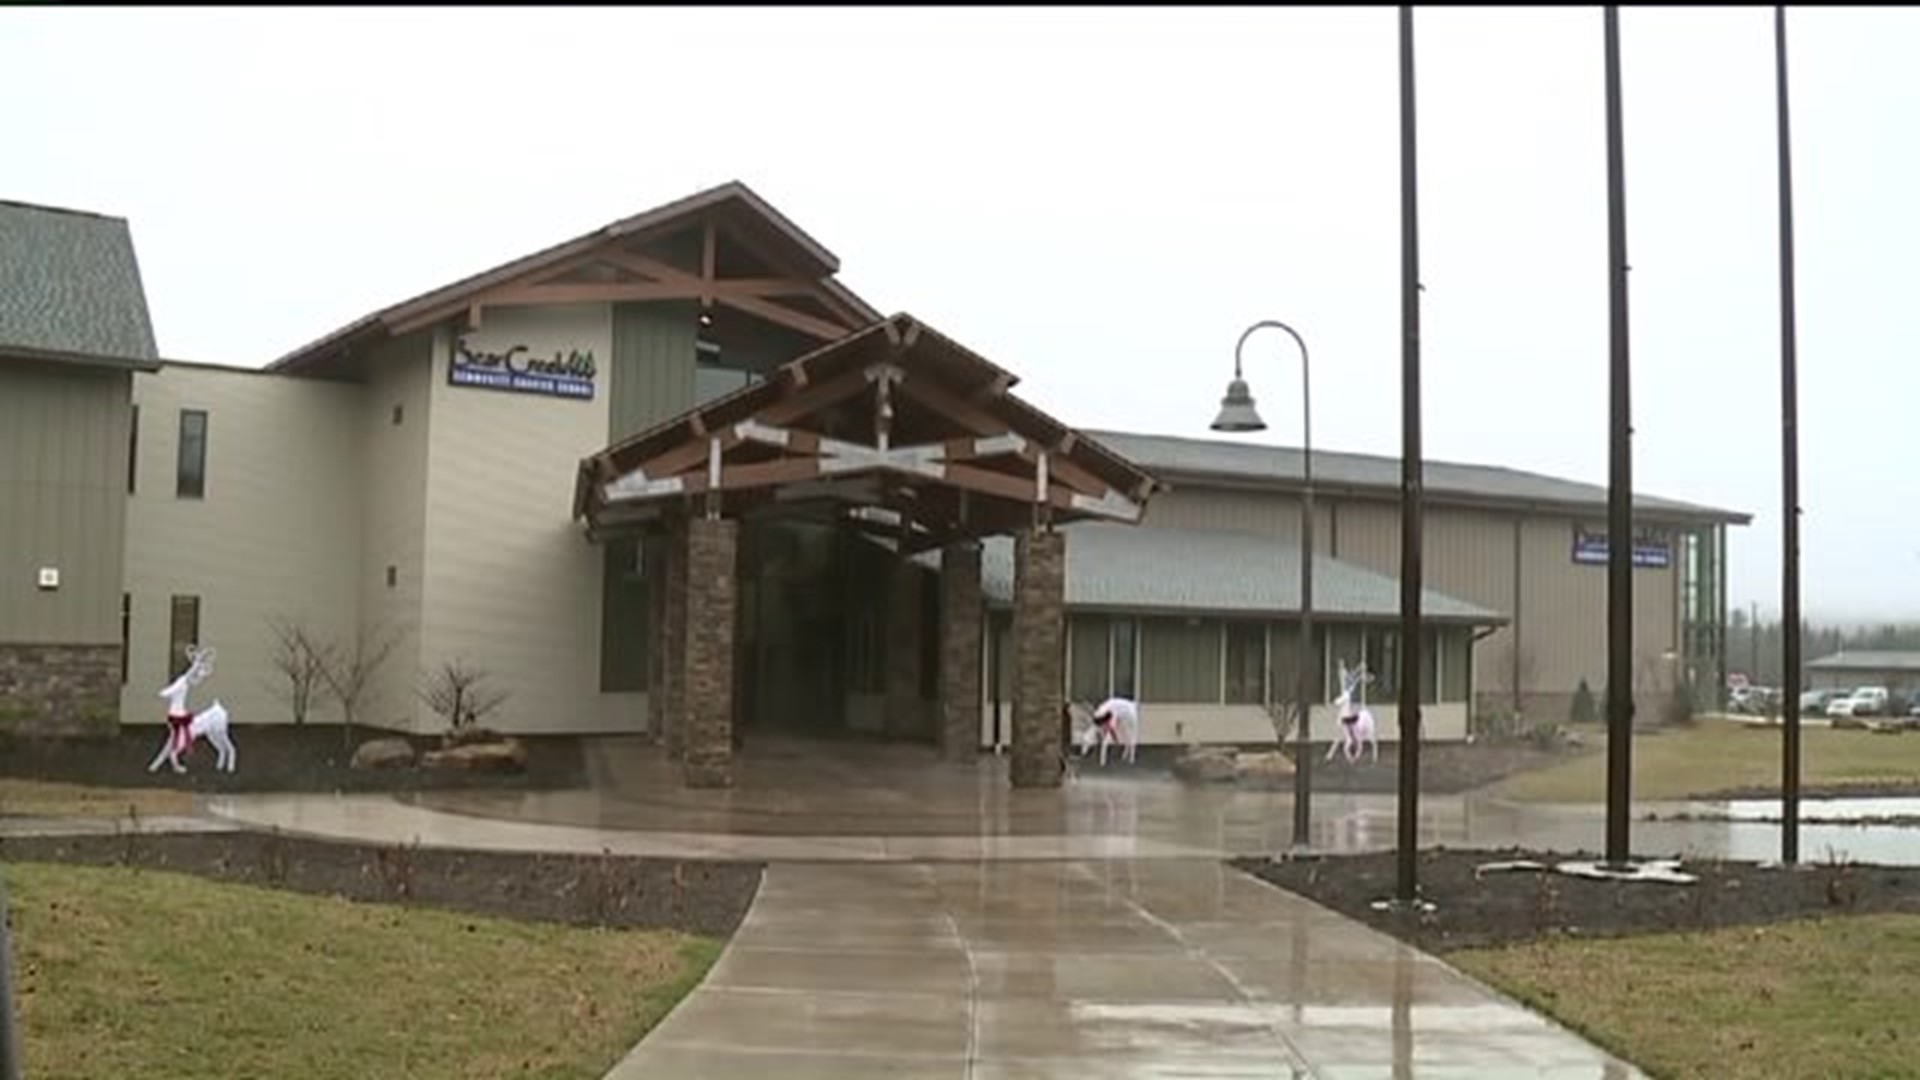 Bear Creek Charter Moving to New Digs